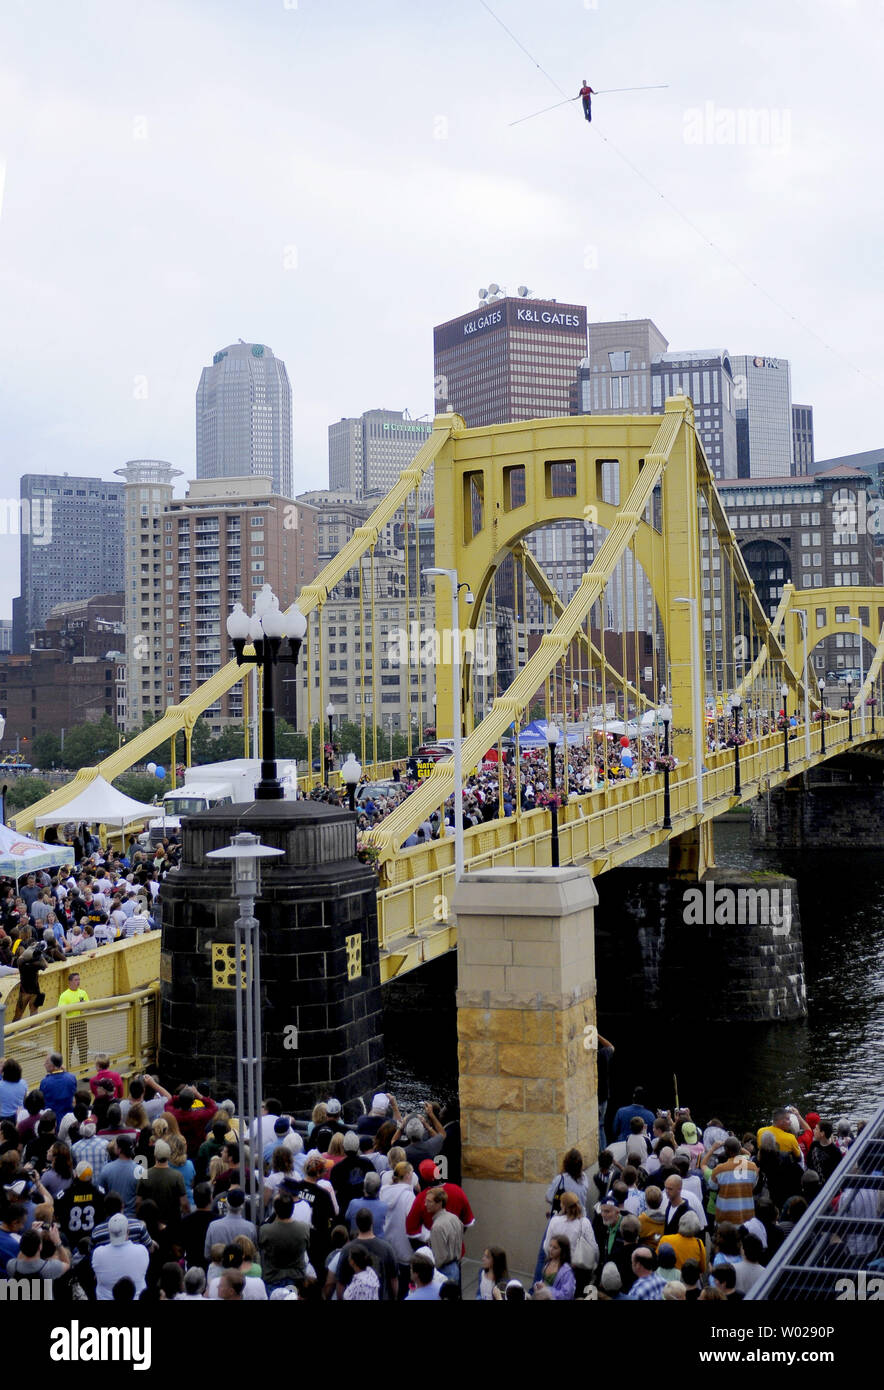 Nik Wallenda walks above the crowd a high wire 1000 feet long and 200 above the  Allegheny River and Roberto Clemente Bridge as part of the Three Rivers Regatta  in Pittsburgh on July 3, 2009. Wallenda is the seventh generation of the legendary Great Wallendas, who have performed in circus acts since the 1800s.    (UPI Photo/Archie Carpenter) Stock Photo